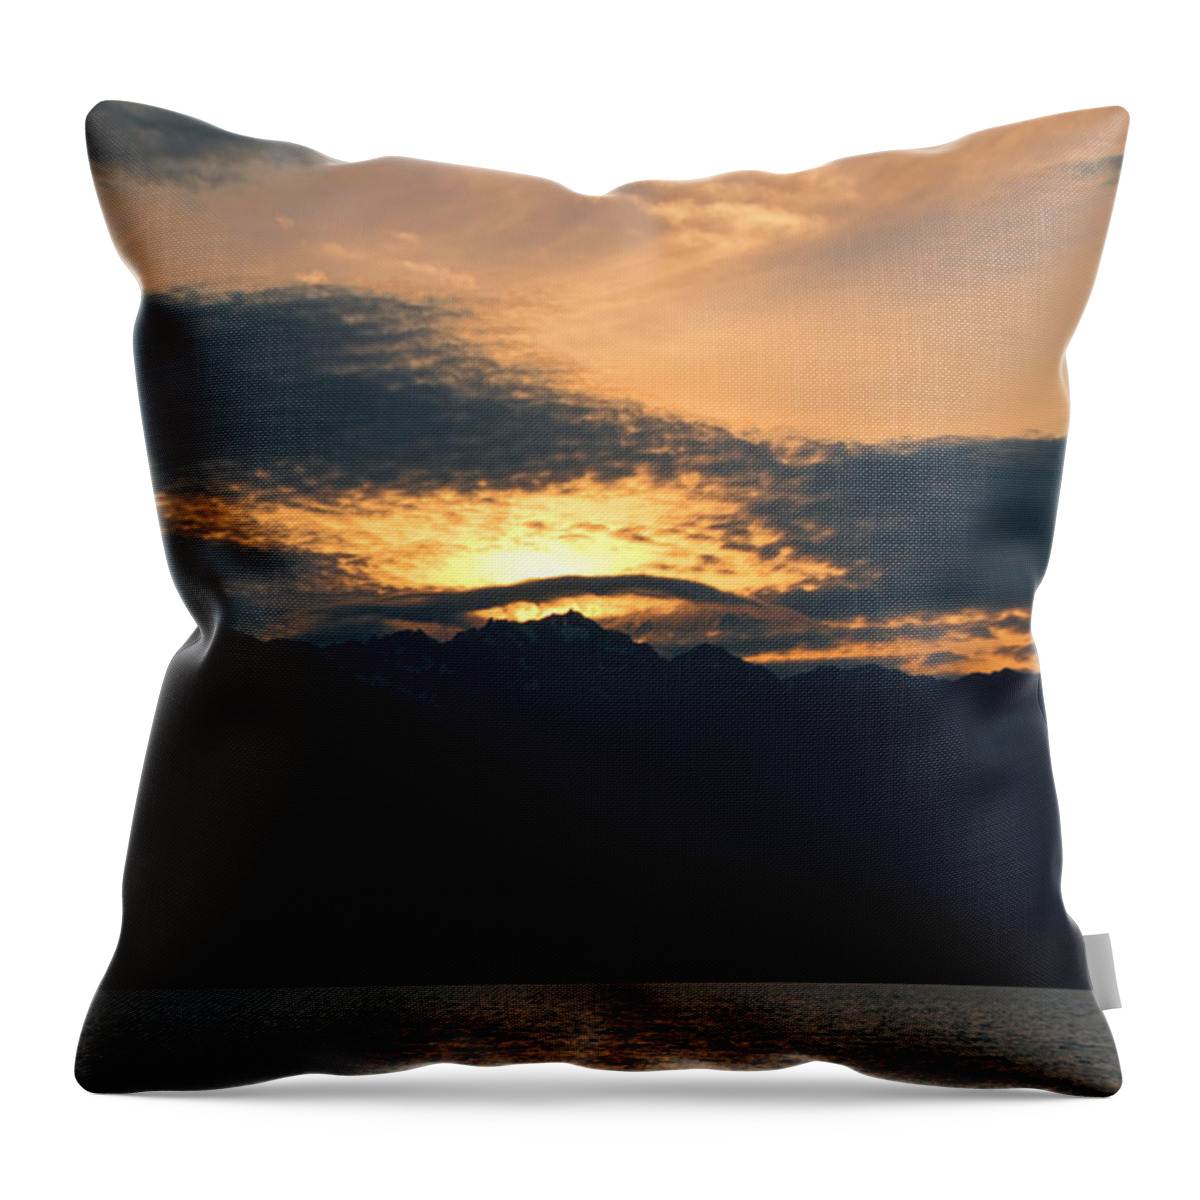 Sunset Throw Pillow featuring the photograph Sunset by Richard and Ellen Thane